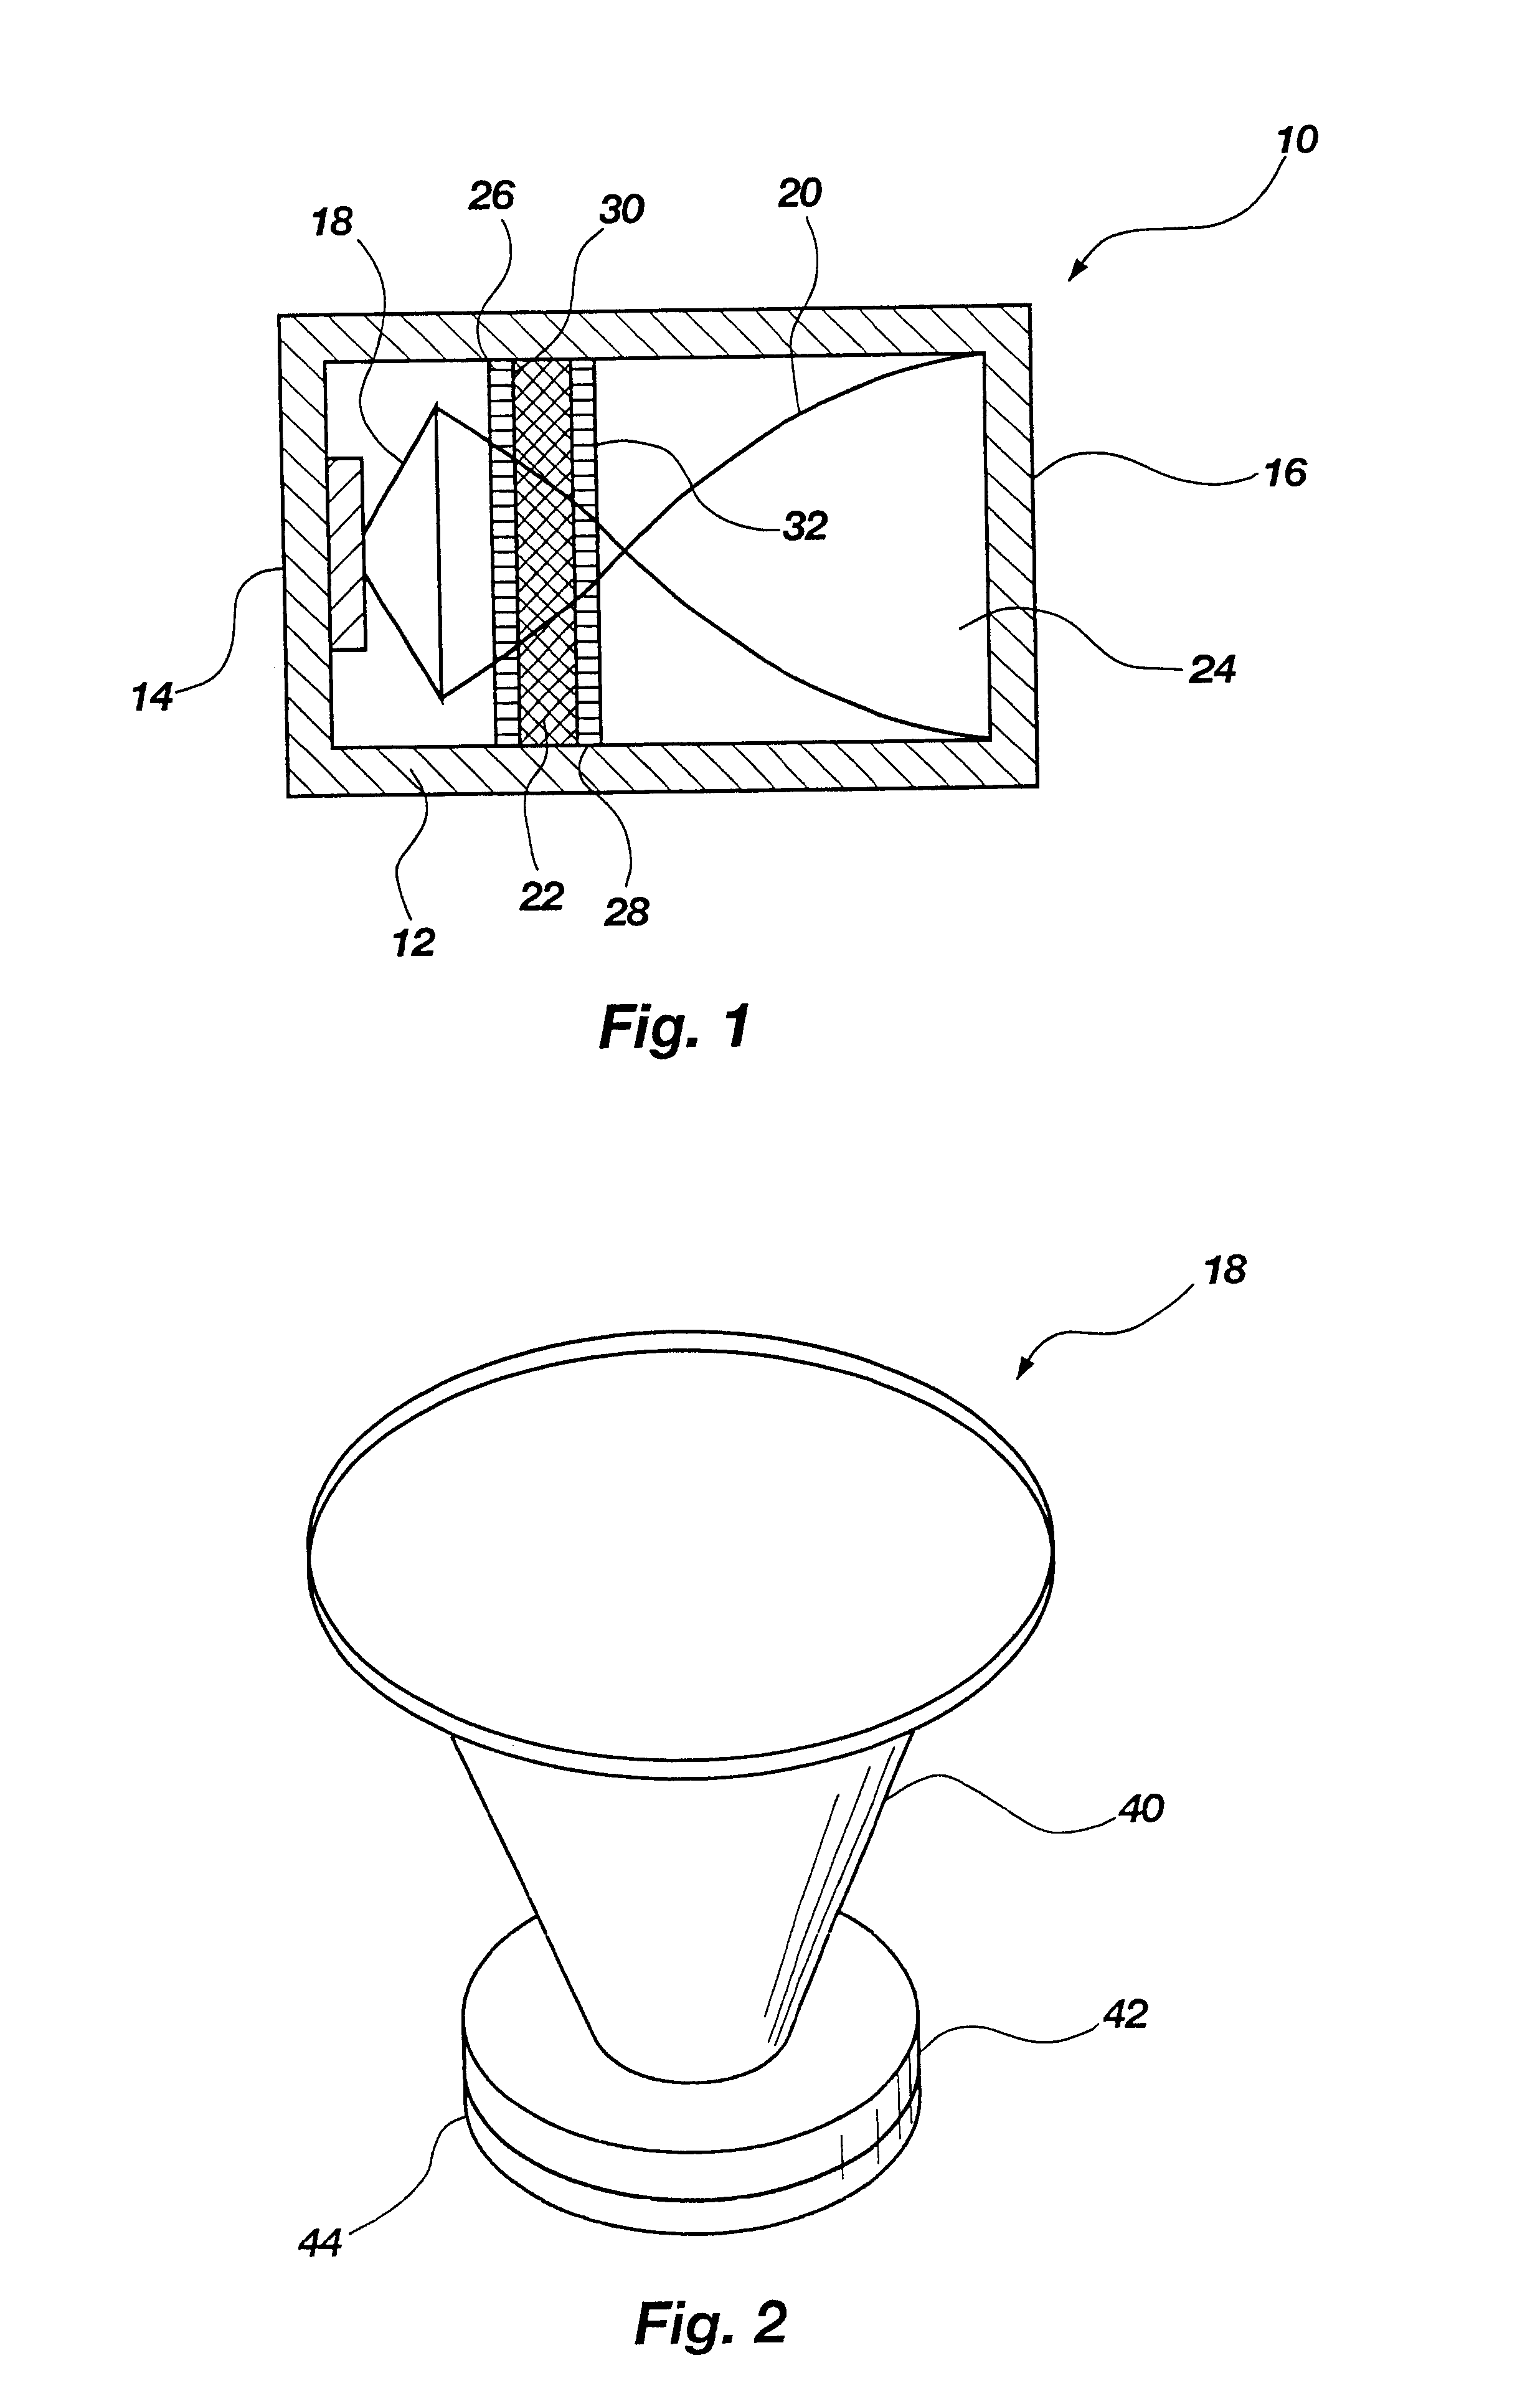 High frequency thermoacoustic refrigerator